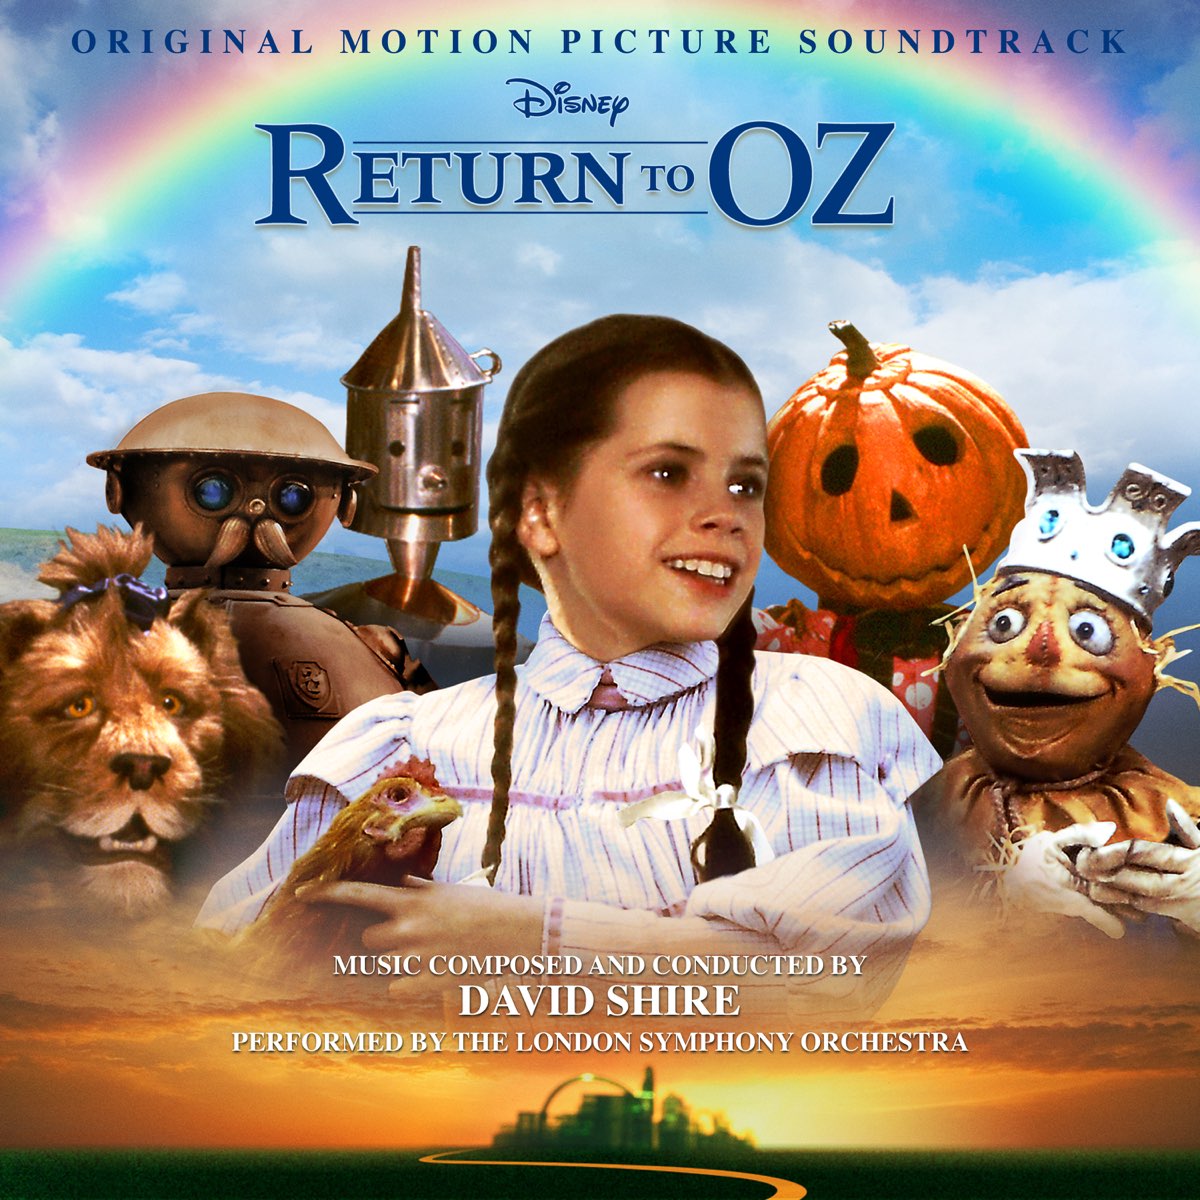 ‎Return to Oz (Original Motion Picture Soundtrack) by David Shire on ...